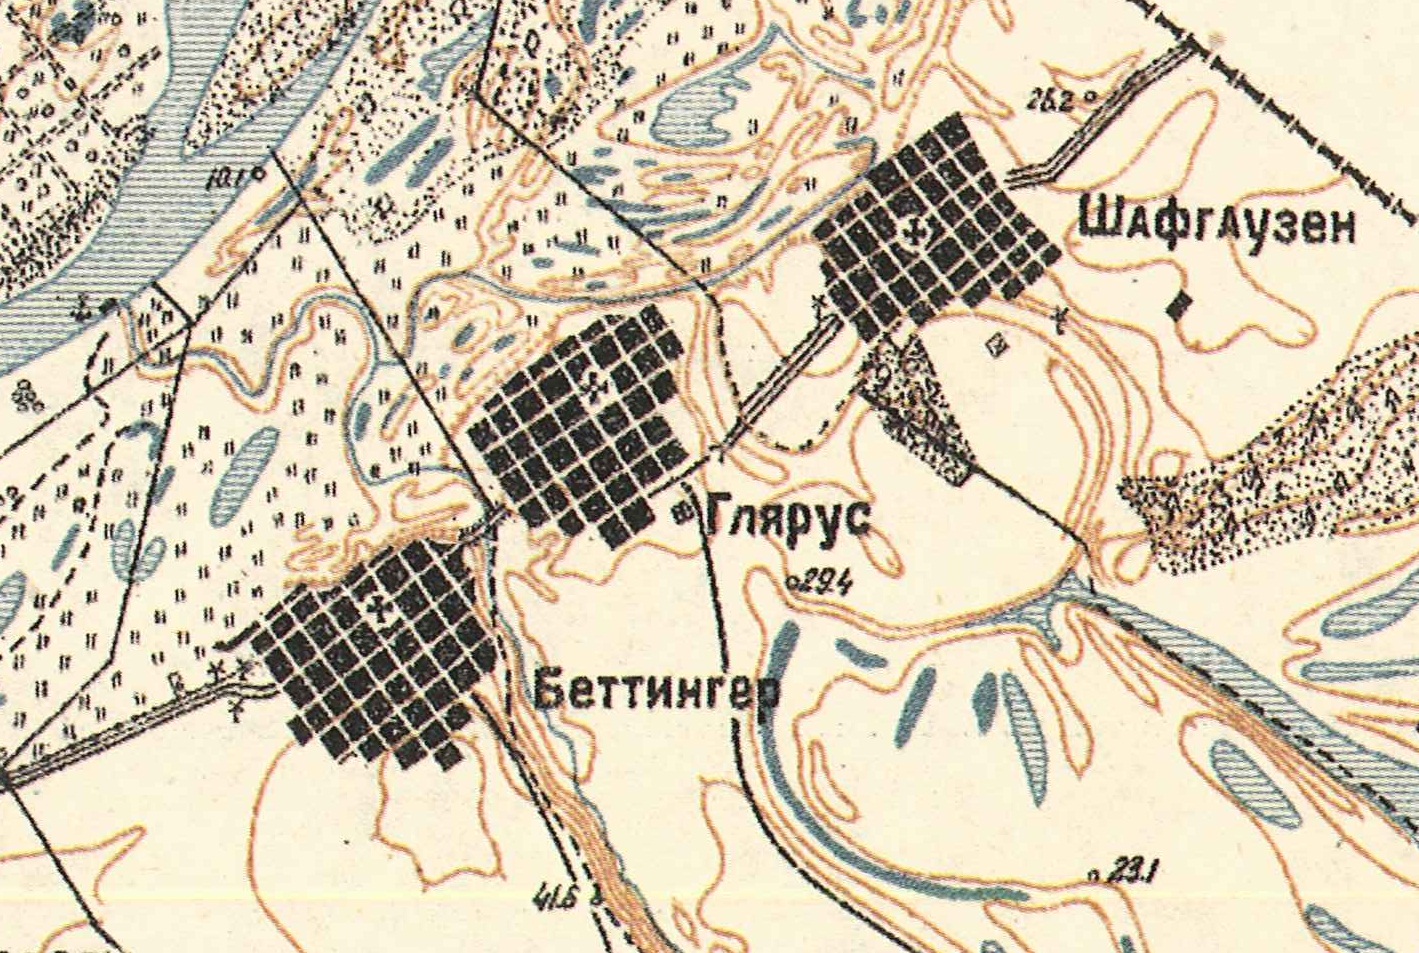 Map showing Bettinger on the left (1935).